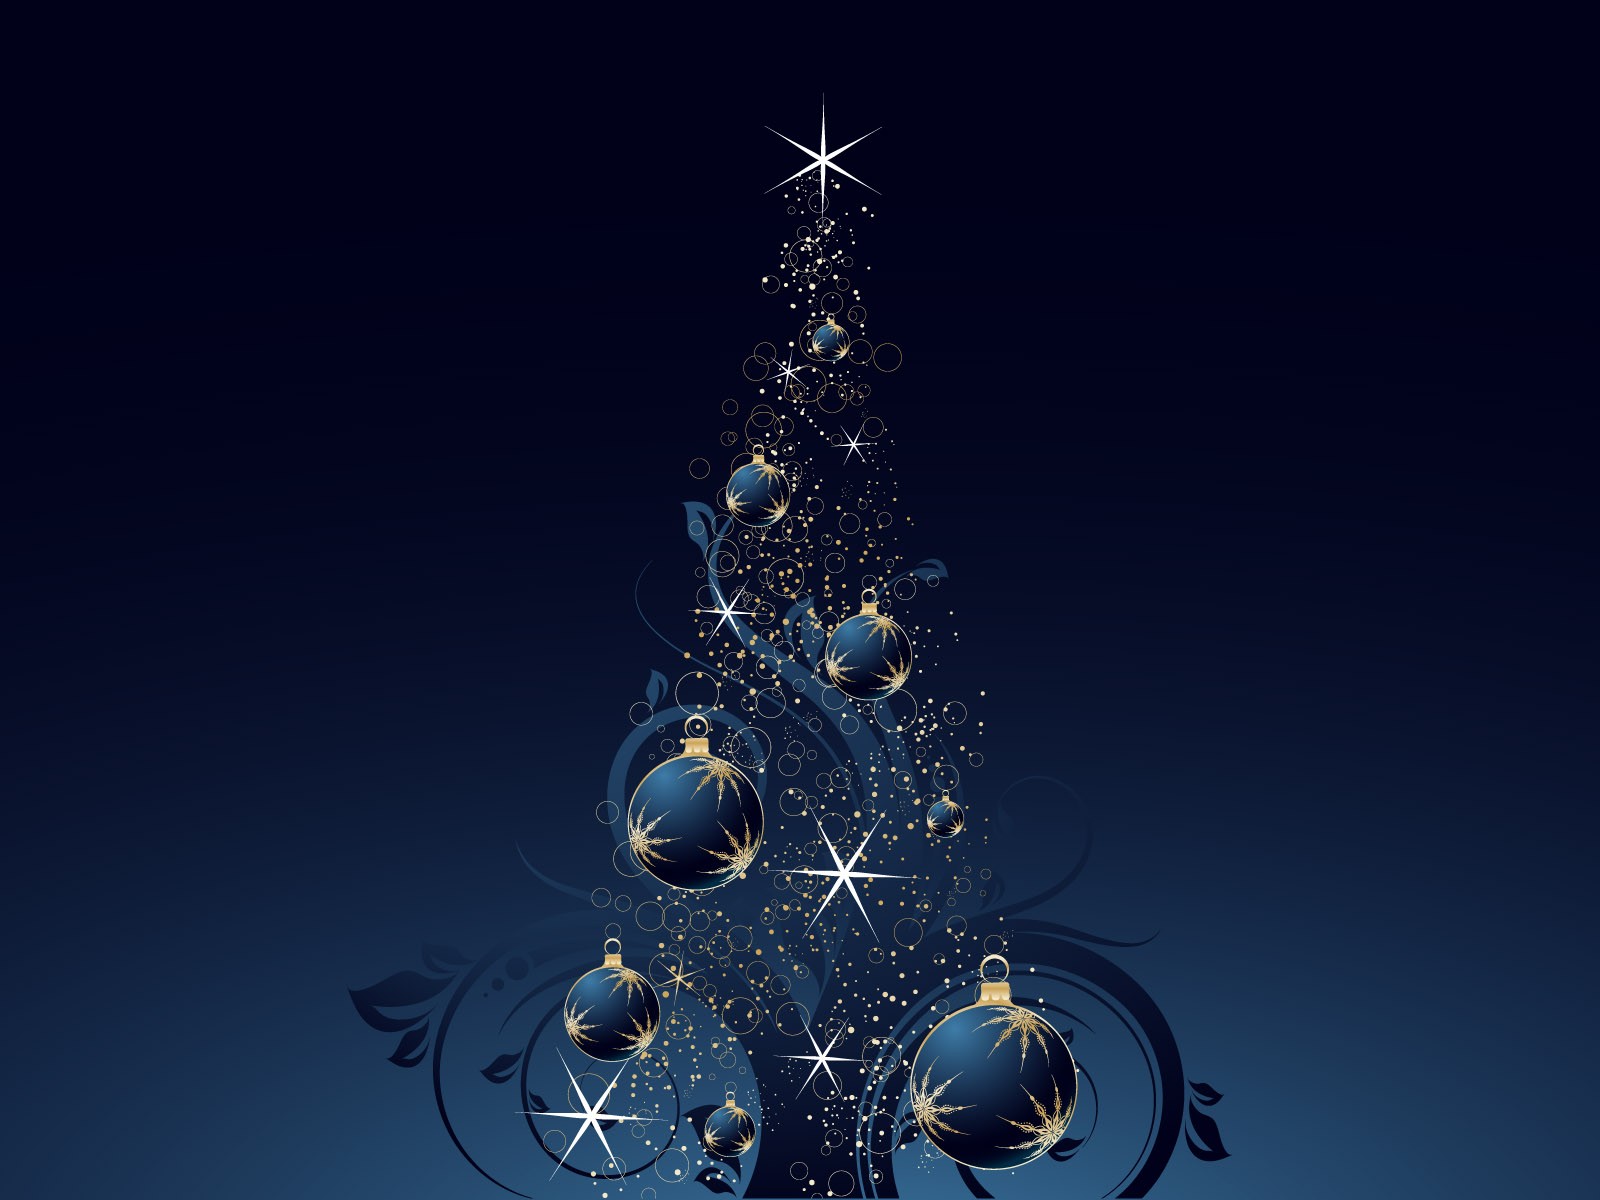 Exquisite Christmas Theme HD Wallpapers #37 - 1600x1200